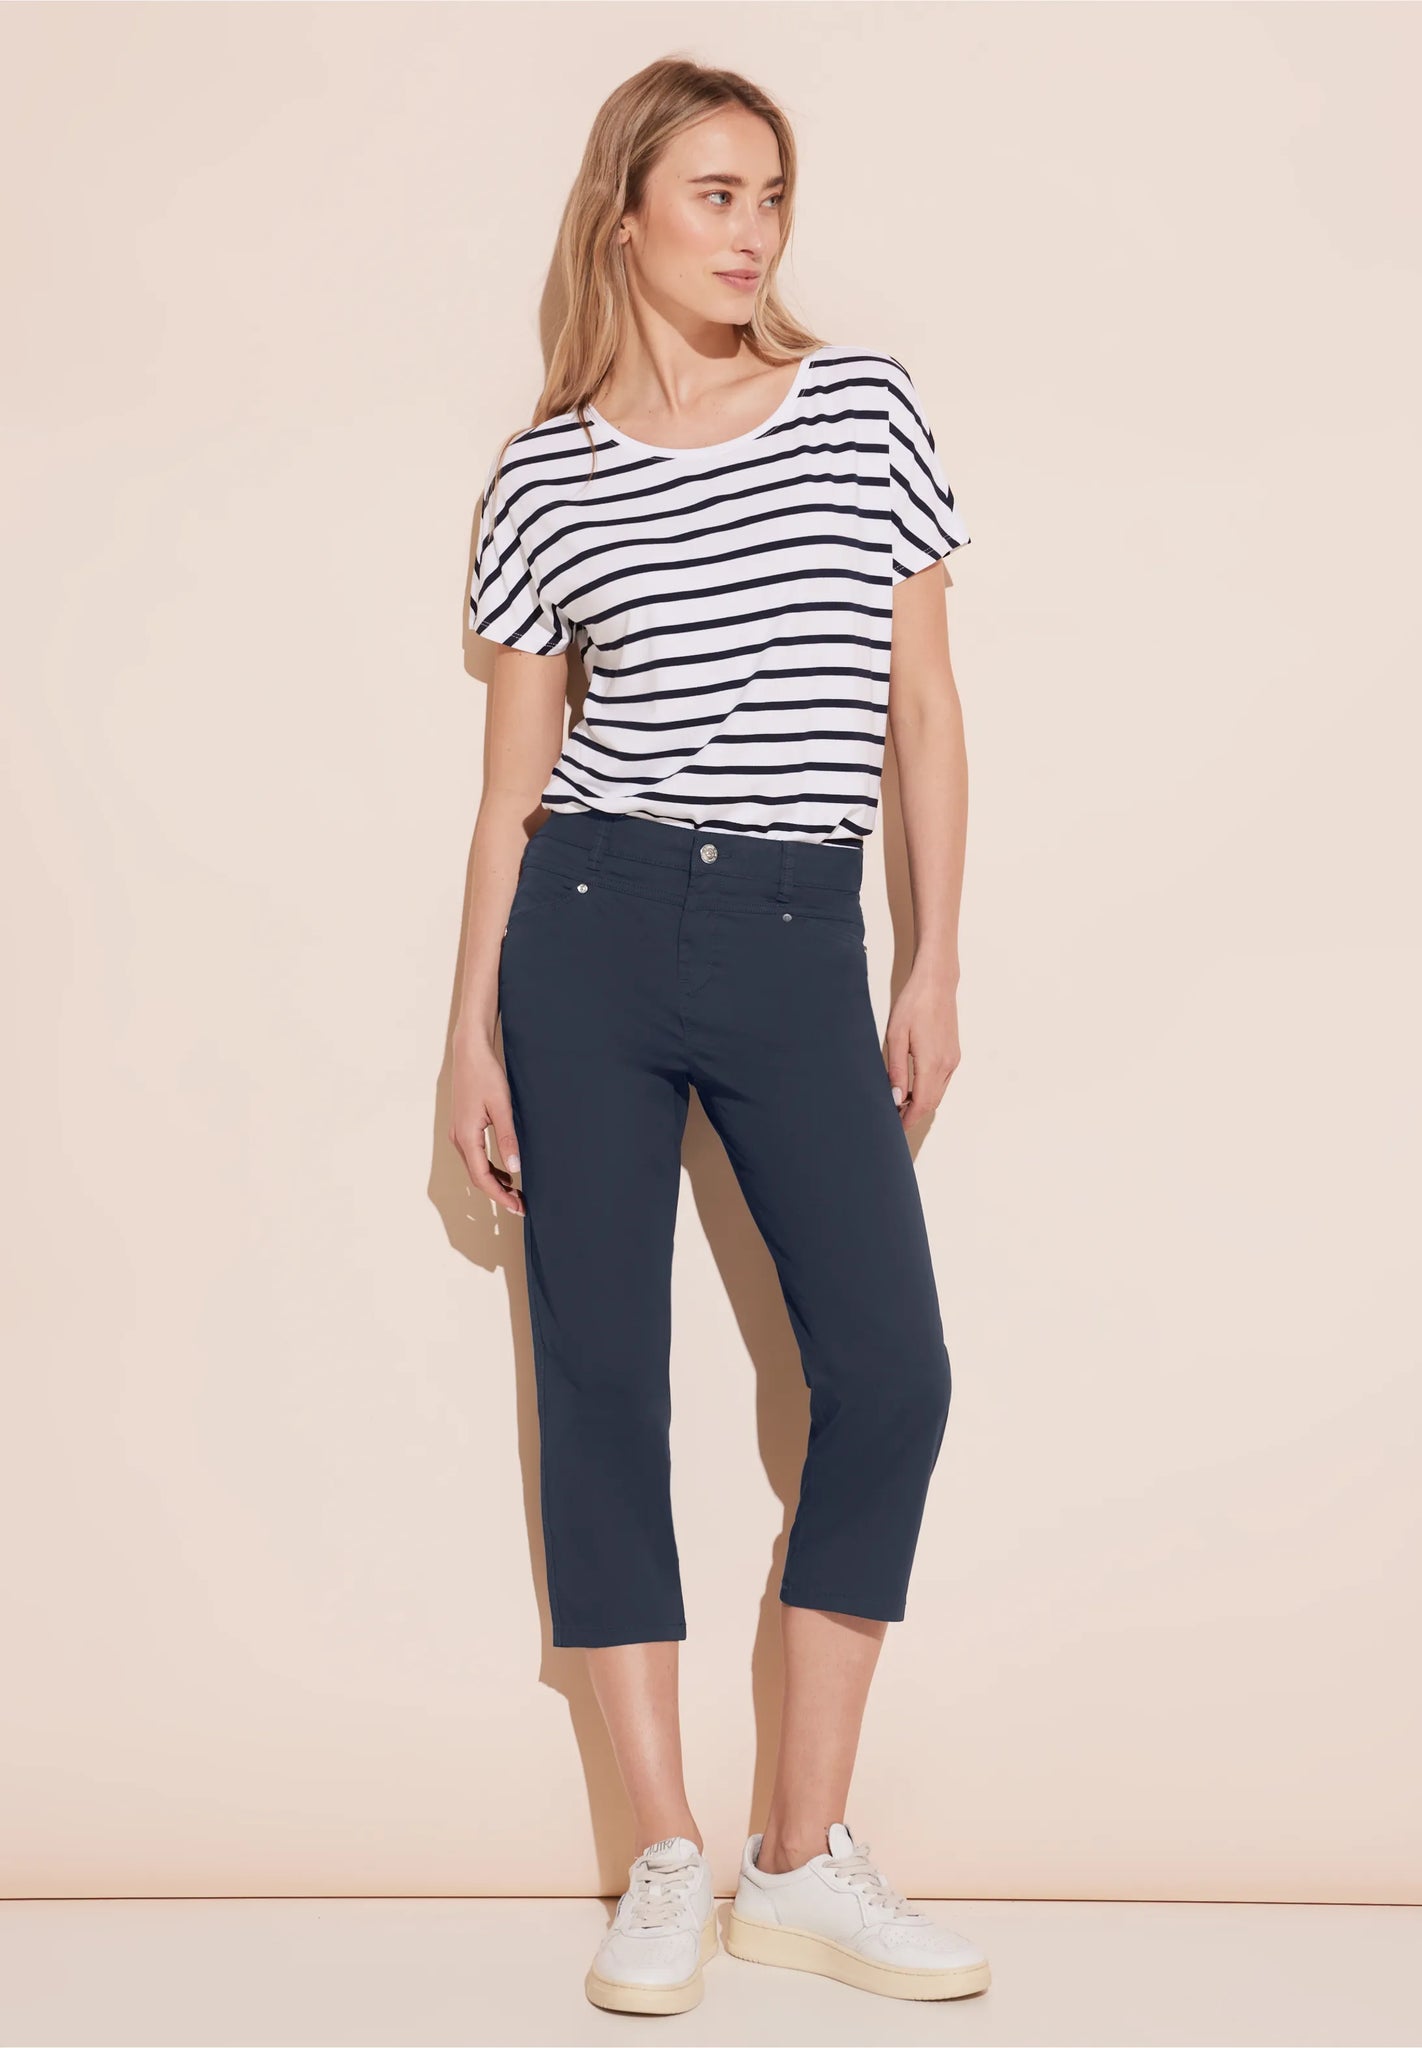 Street One Cotton Chino Crop Trousers. Navy or Sand 377580